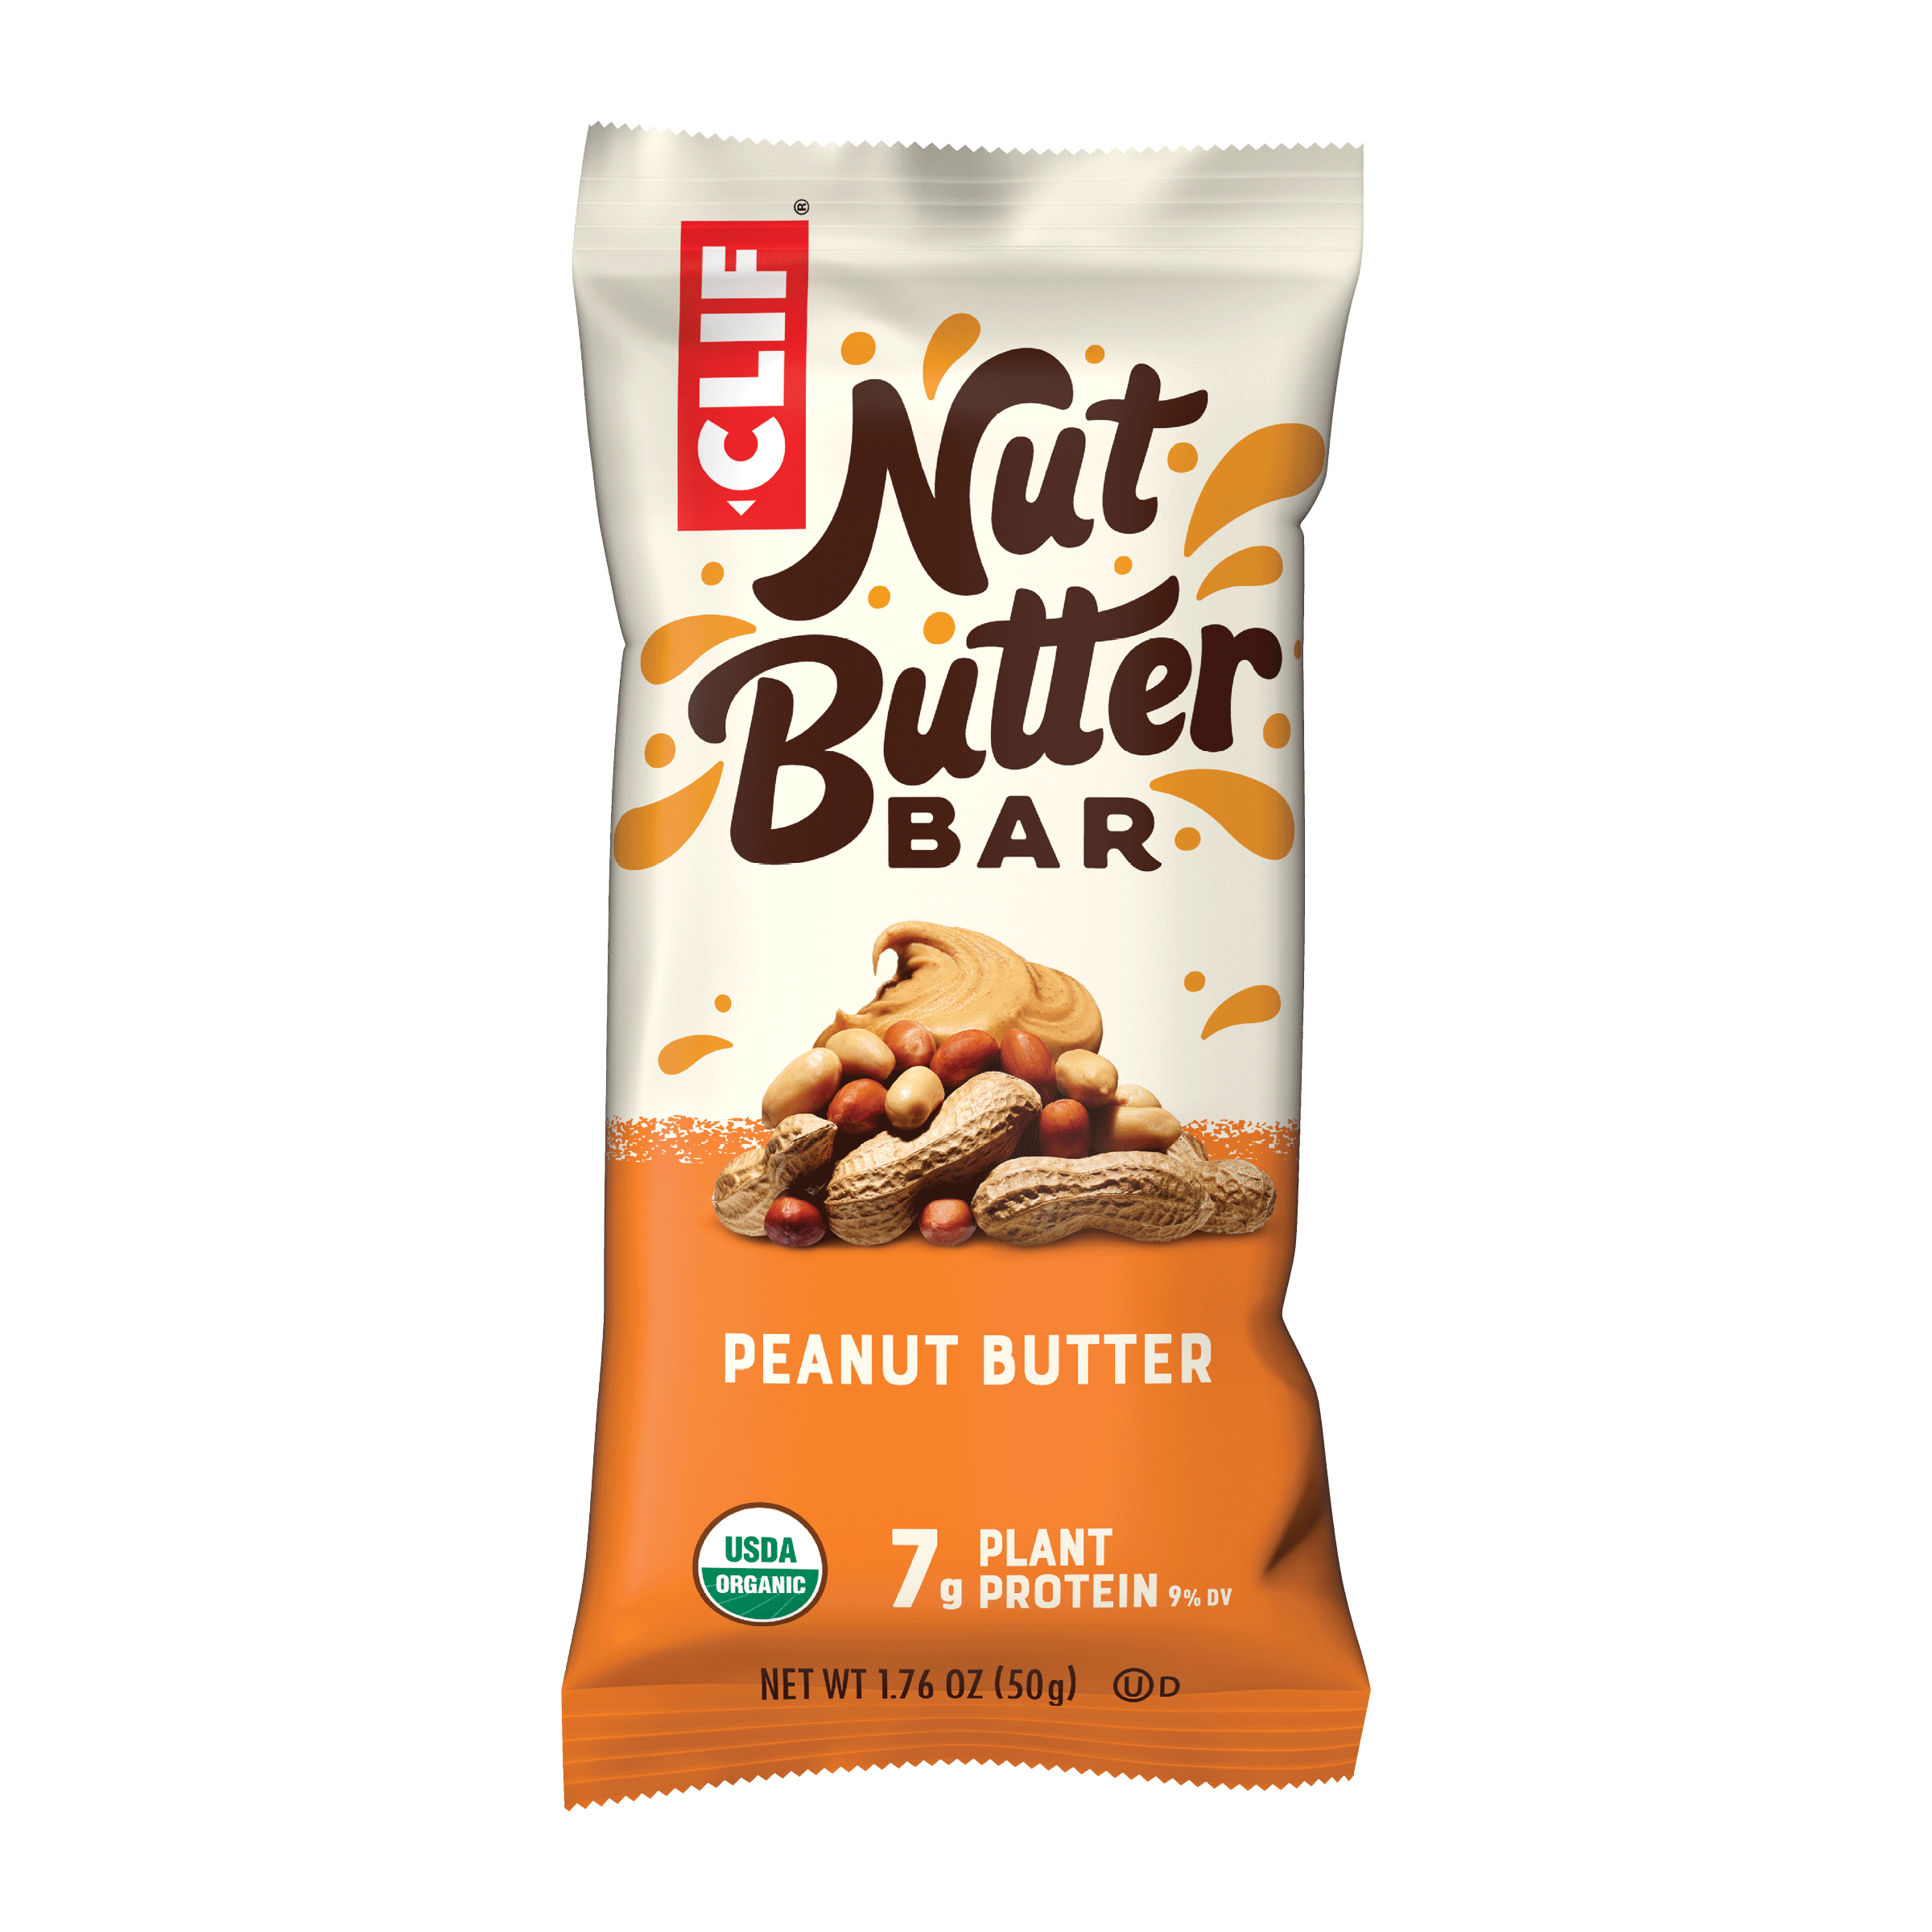 Butter pouches - Hey You're Nuts